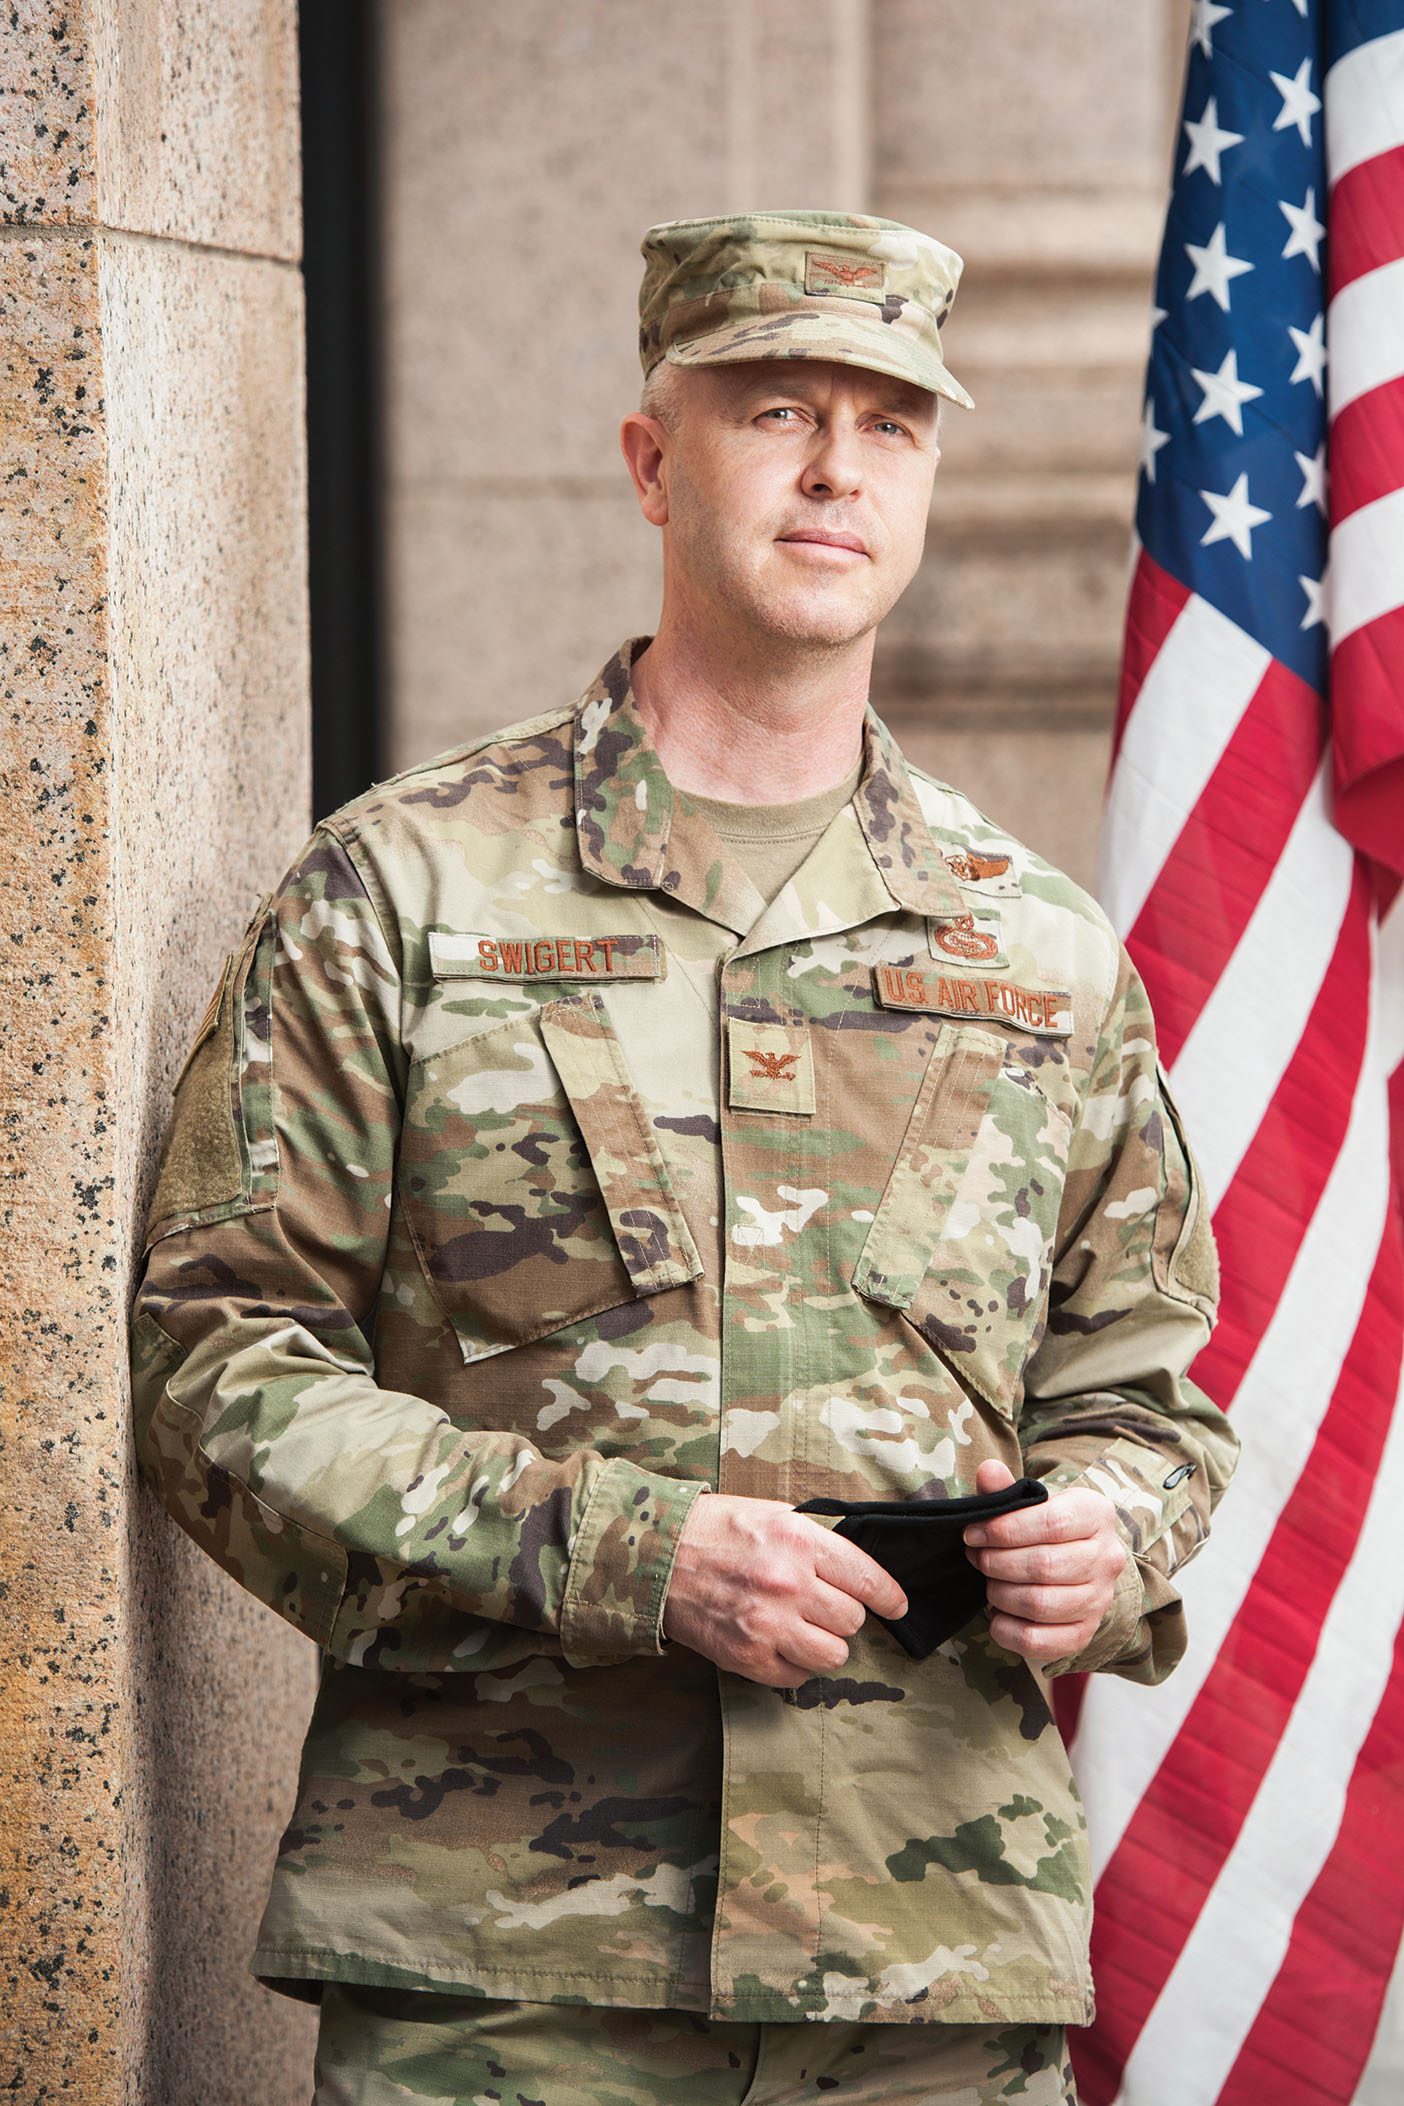 Air Force colonel Brett Swigert in army fatigues standing in front an American flag.